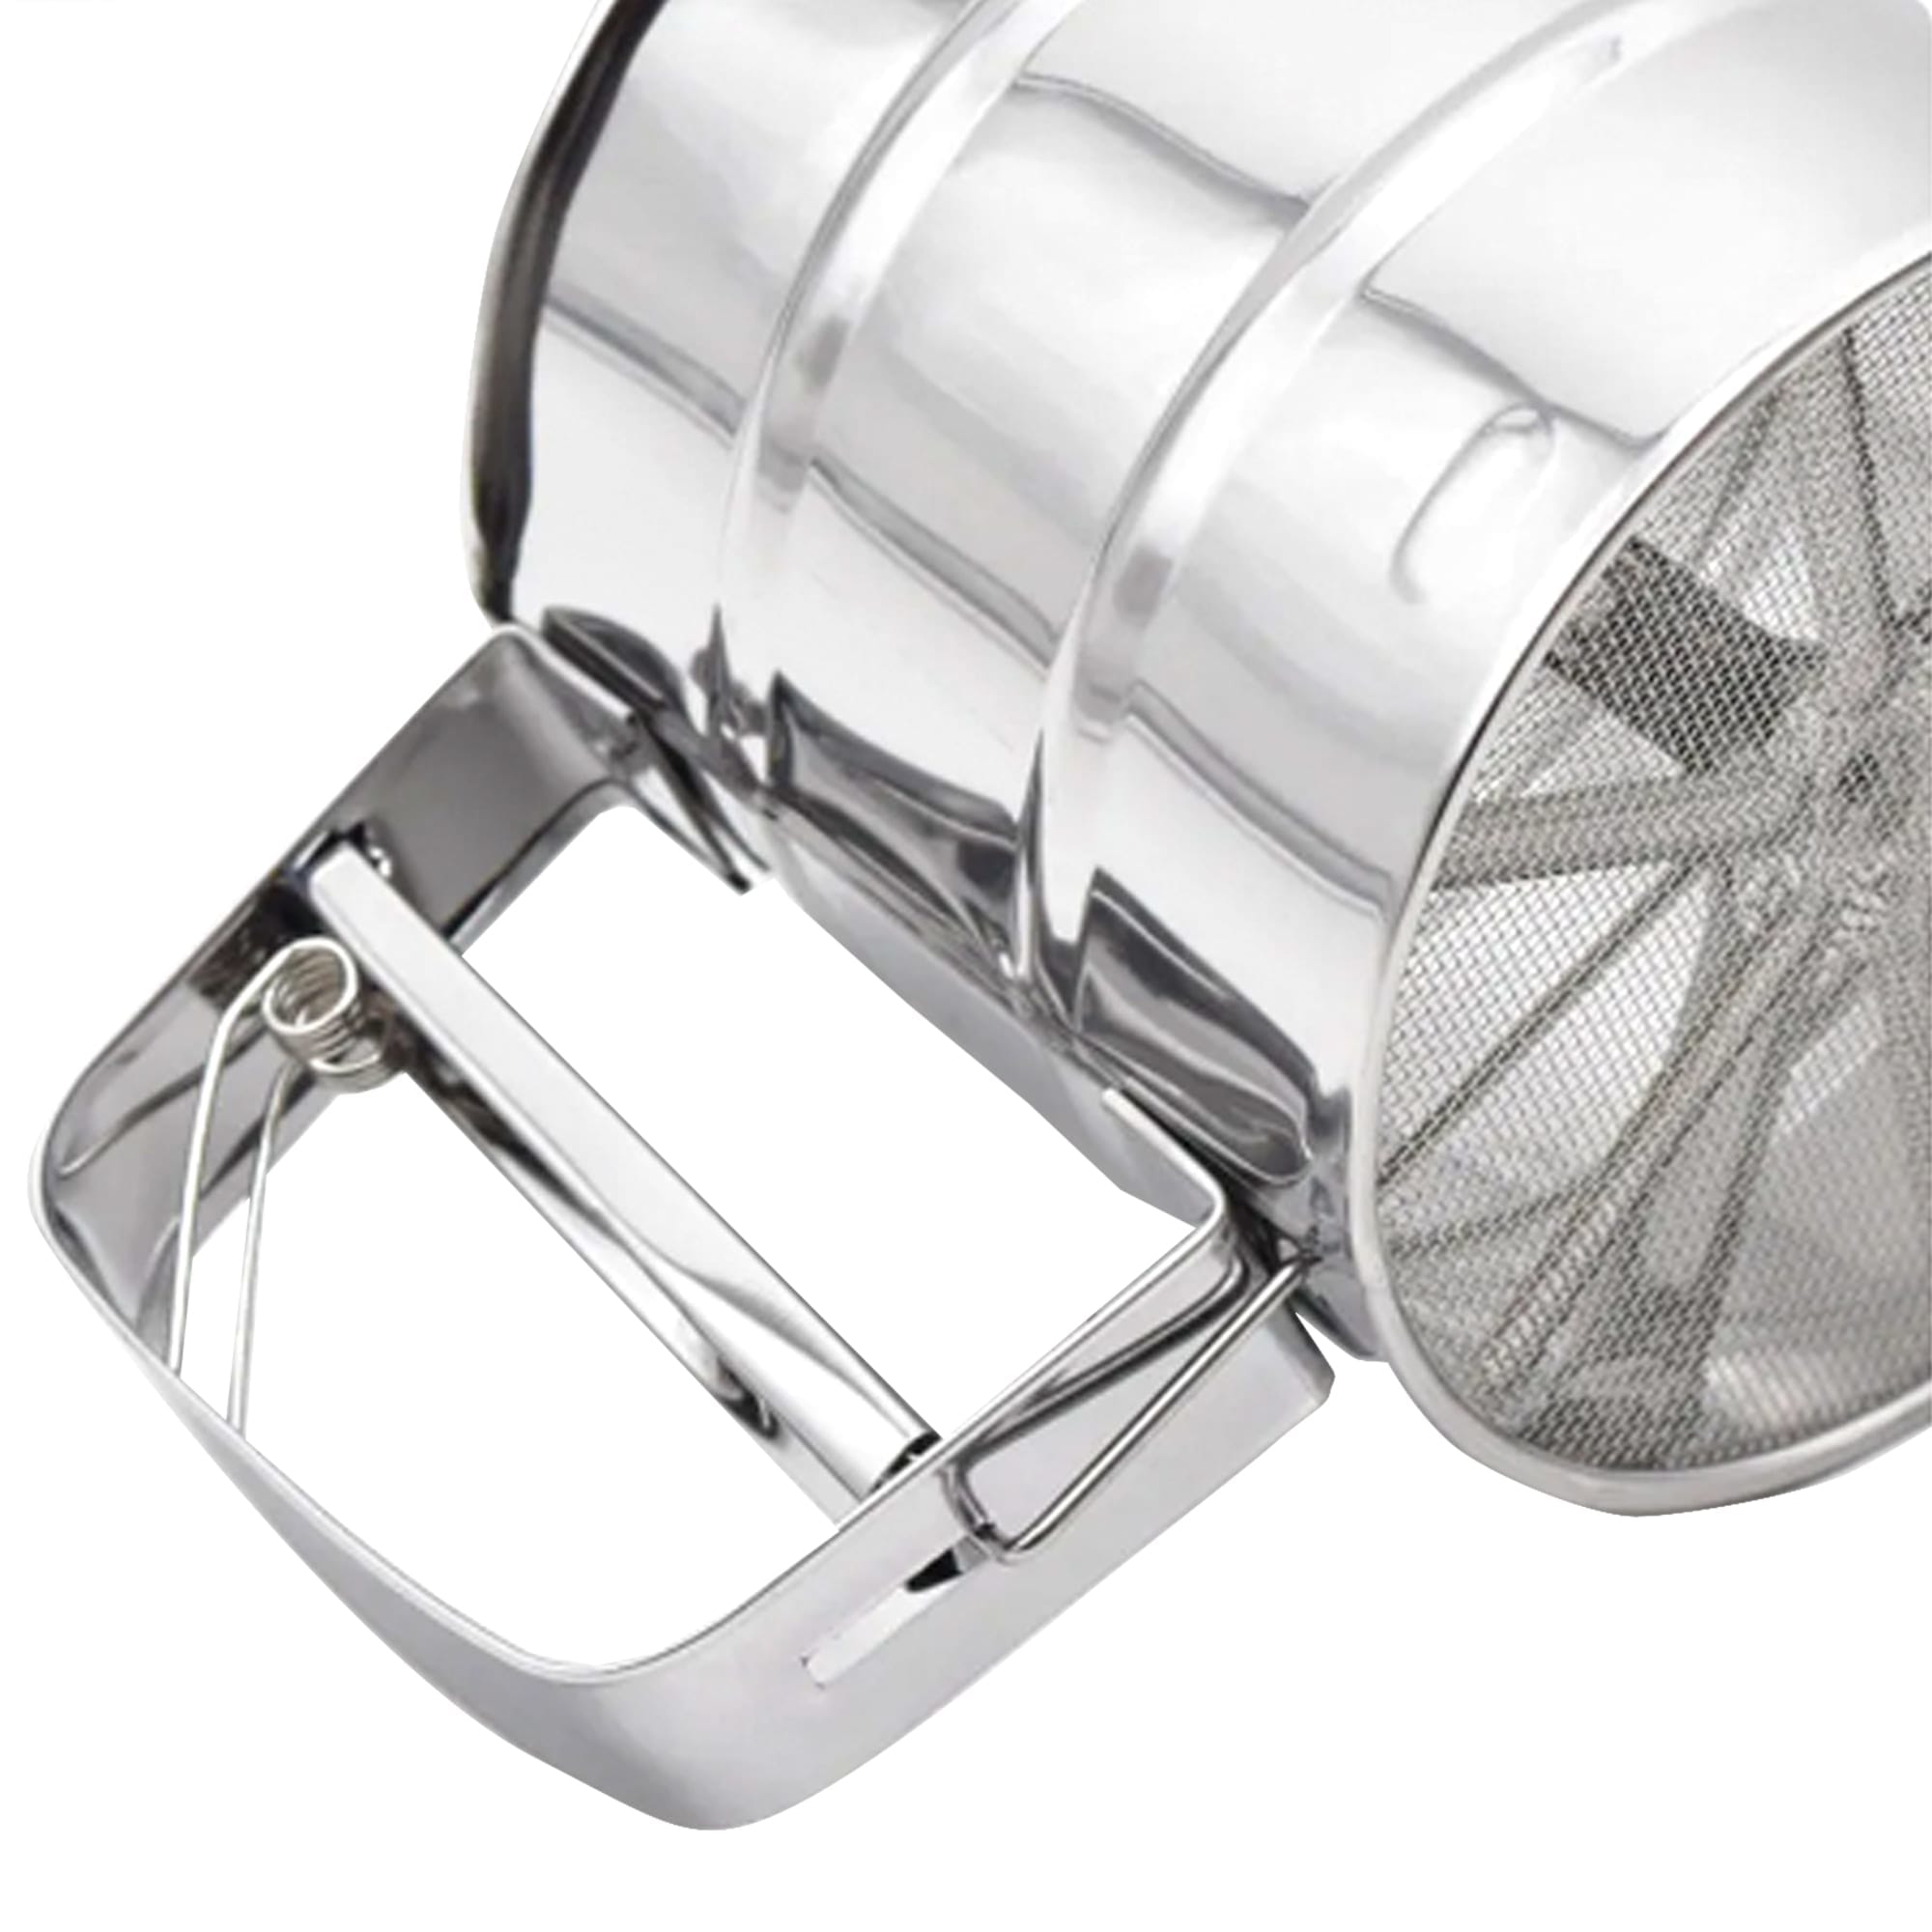 Home Basics Stainless Steel Flour Sifter $3.00 EACH, CASE PACK OF 24